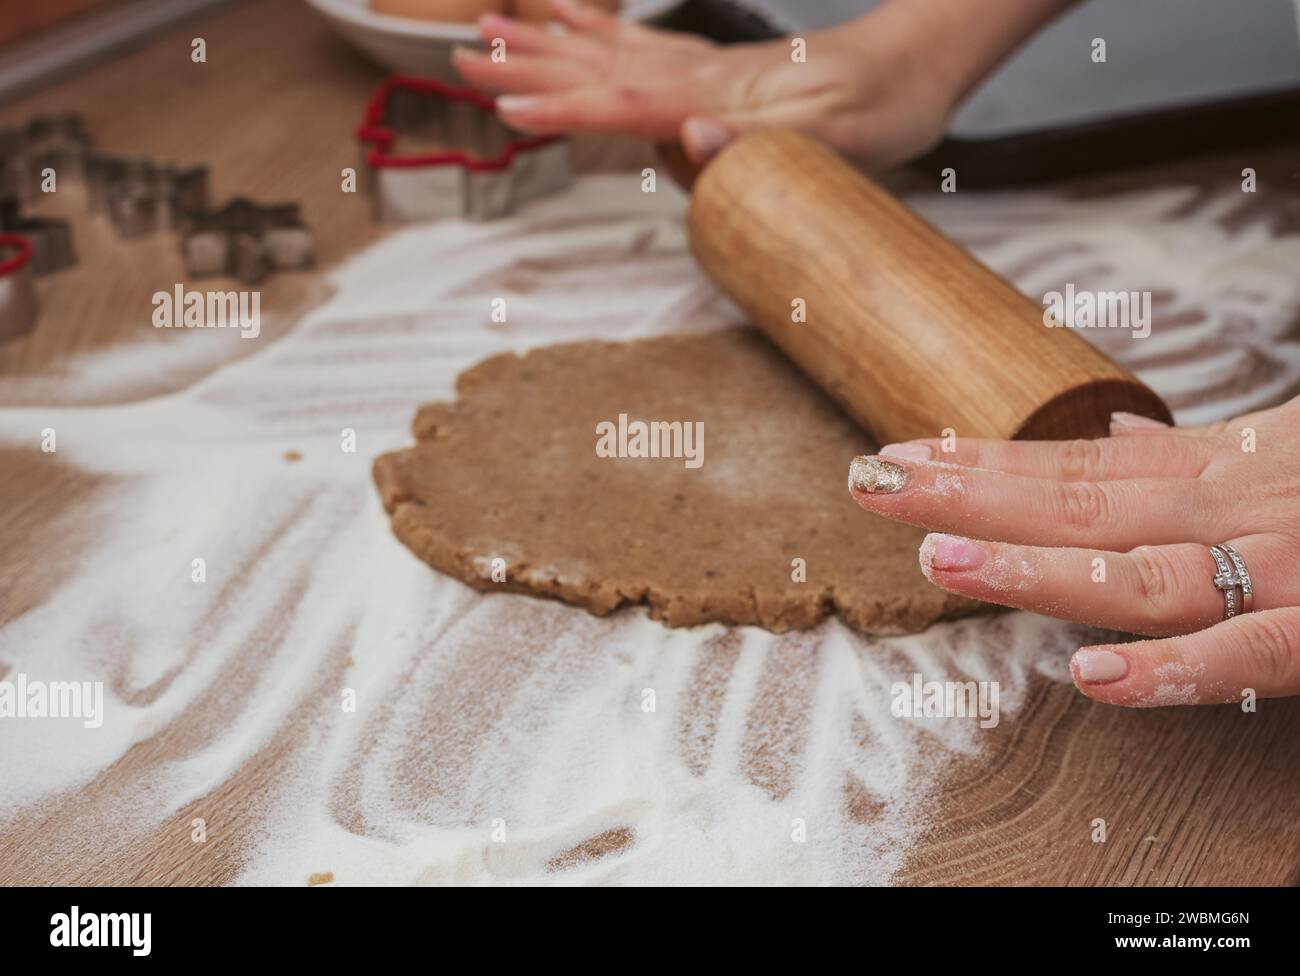 A Caucasian female chef stands in her kitchen, rolling out dough on a wooden countertop Stock Photo